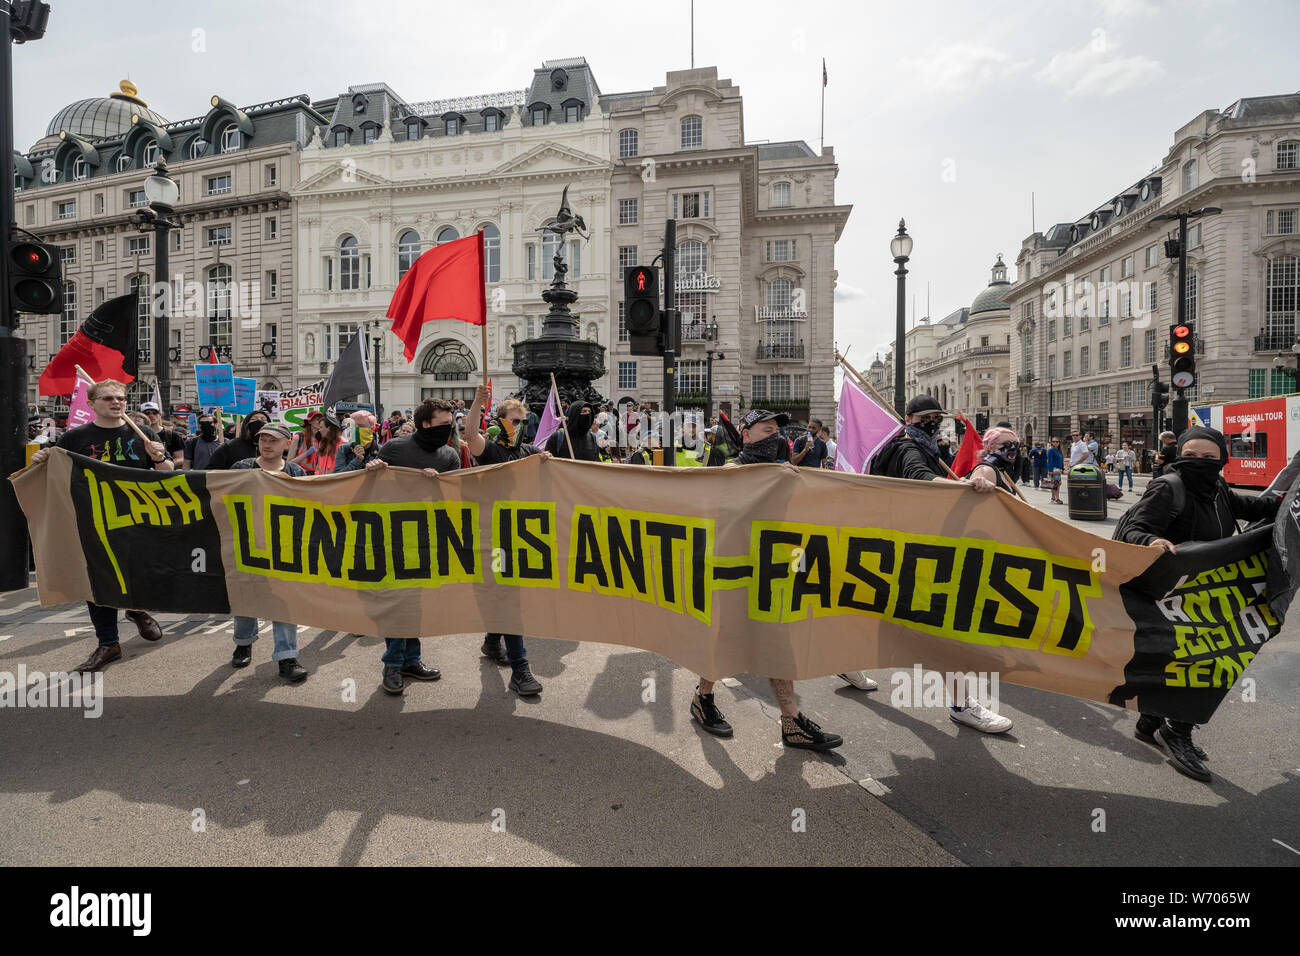 London, UK. 3rd August, 2019. Anti-fascists clash with police whilst counter-protesting the 'Free Tommy Robinson' demonstration. Police arrest twenty four during a mass demonstration in support of the jailed Tommy Robinson, real name Stephen Yaxley-Lennon, who was sentenced last month to nine months in prison after being found guilty in contempt of court. Counter-protesters including antifascist activists and the anti-racist group: Stand Up to Racism, opposed the pro-Robinson demonstrators with protest groups kept apart by met police. Credit: Guy Corbishley/Alamy Live News Stock Photo